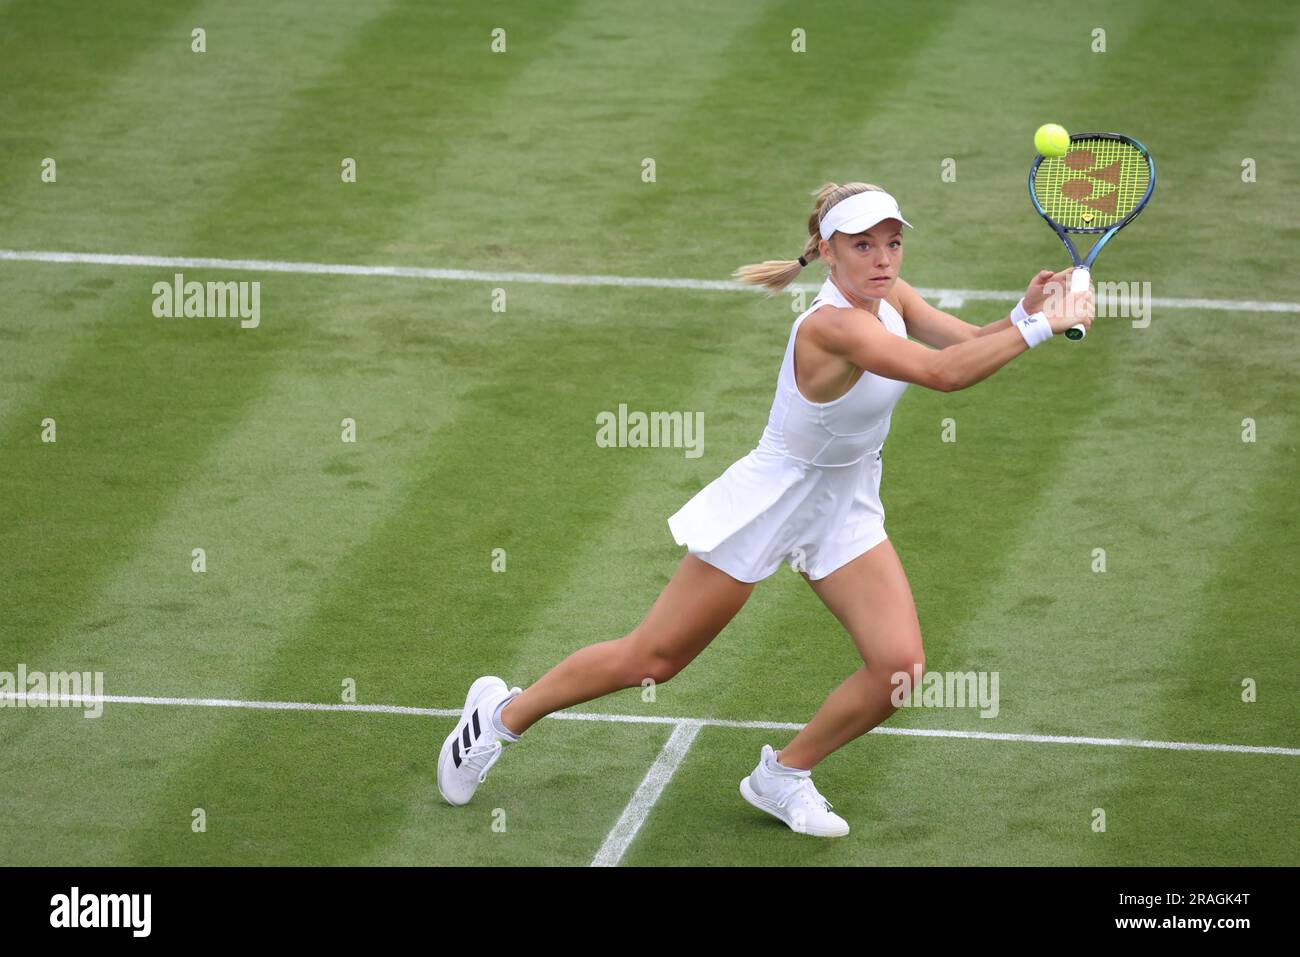 Wimbledon. Katie Swan of the, United States. 03rd July, 2023. in action during her first round match against Belinda Bencic of Switzerland during opening day at Wimbledon. Credit: Adam Stoltman/Alamy Live News Stock Photo